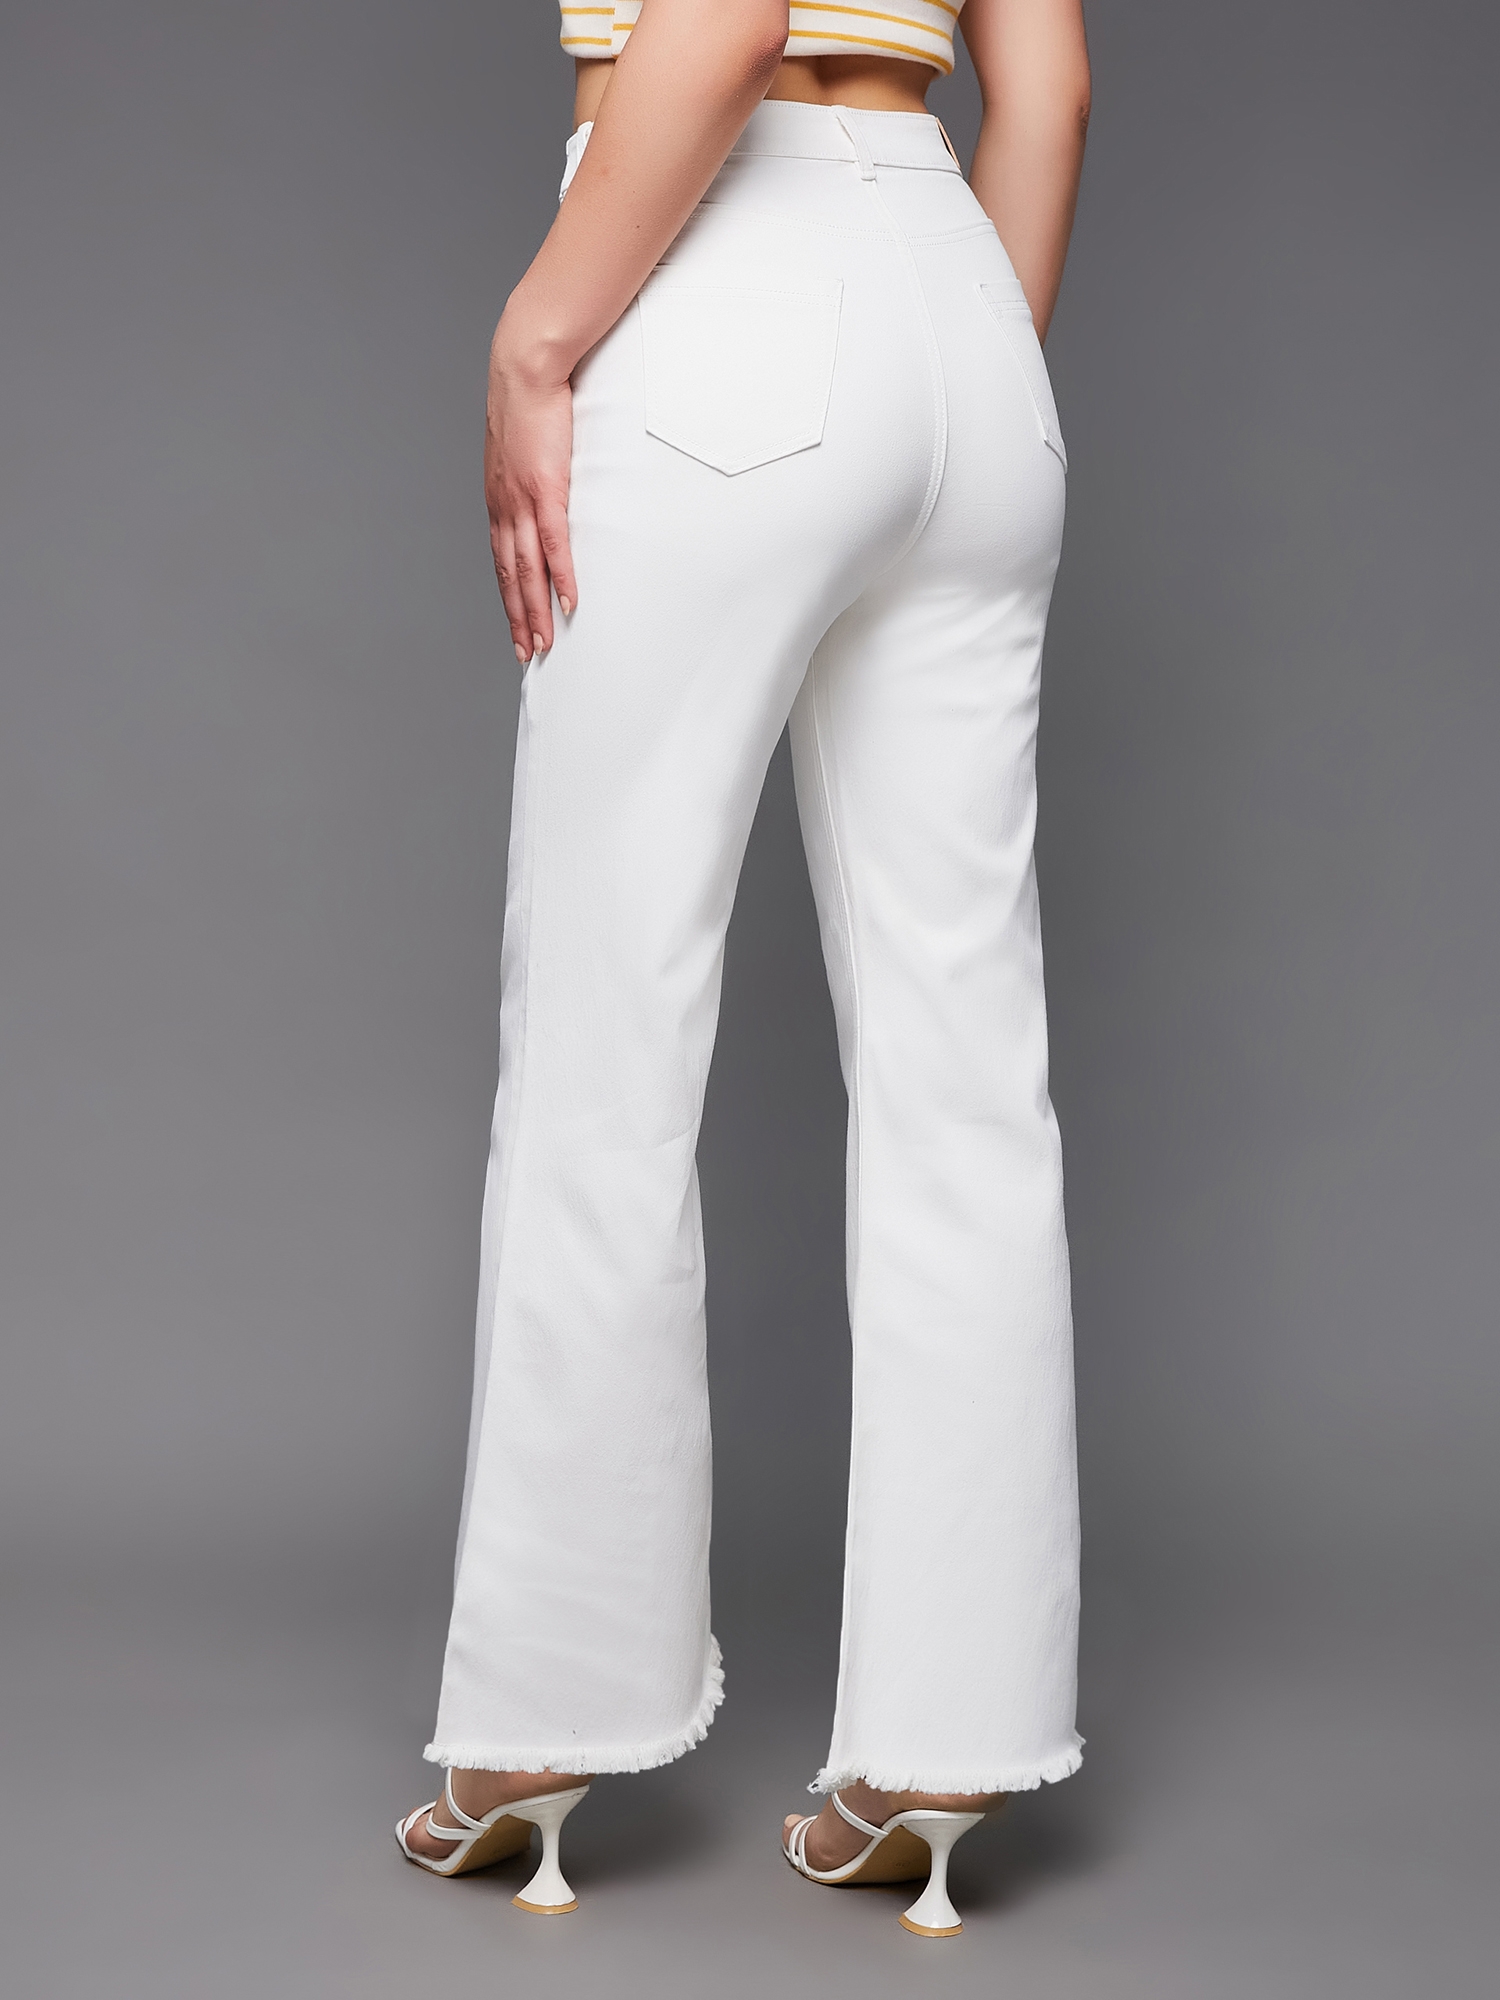 MISS CHASE | Women's White Solid Bootcut Jeans 3